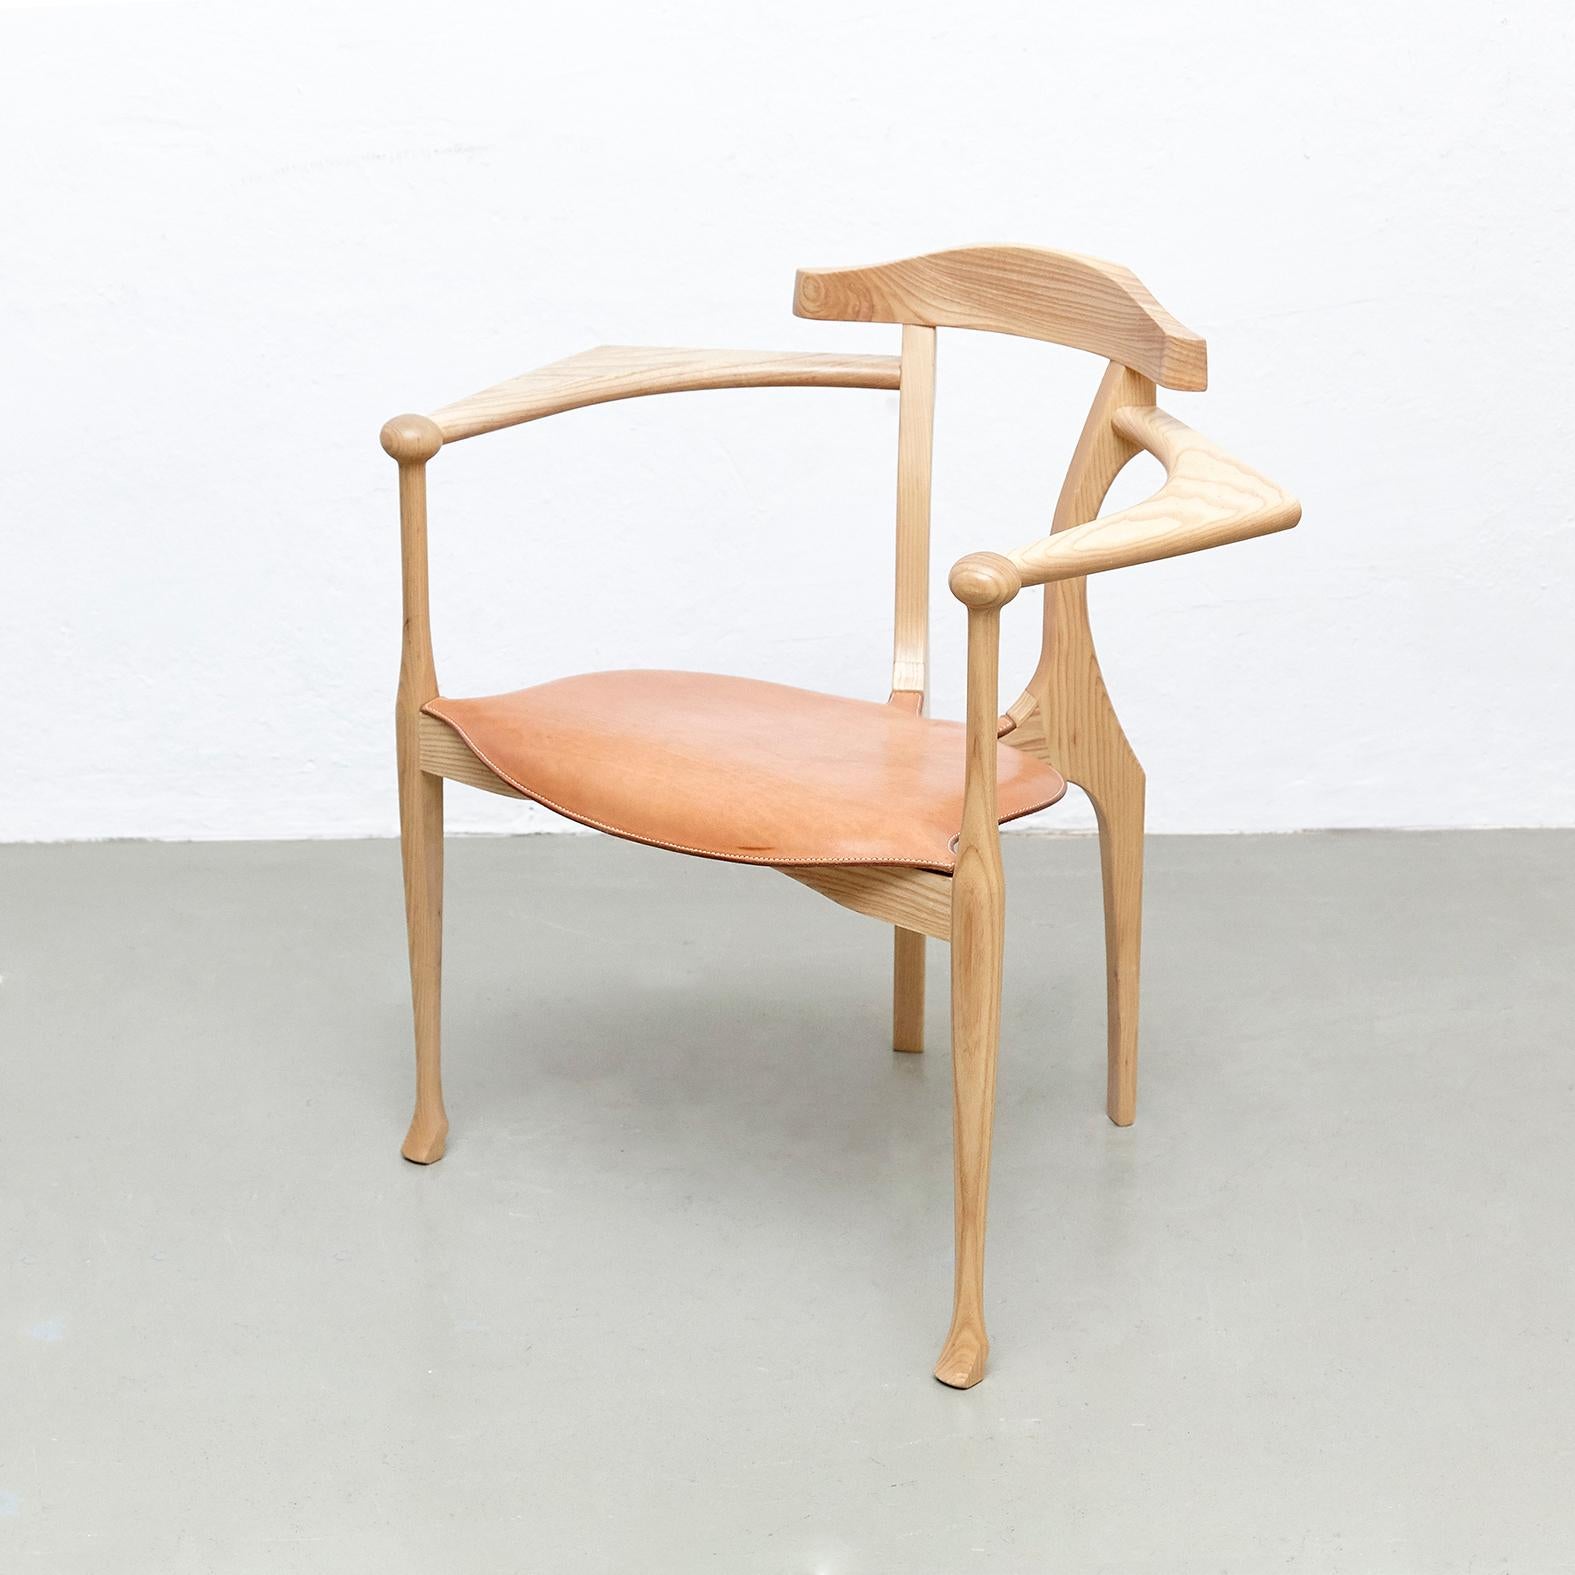 Gaulino armchair prototype designed by Oscar Tusquets manufactured by BD barcelona design, circa 2010.

Structure and back in wood, seat with upholstered in leather.

In good original condition, with minor wear consistent with age and use,